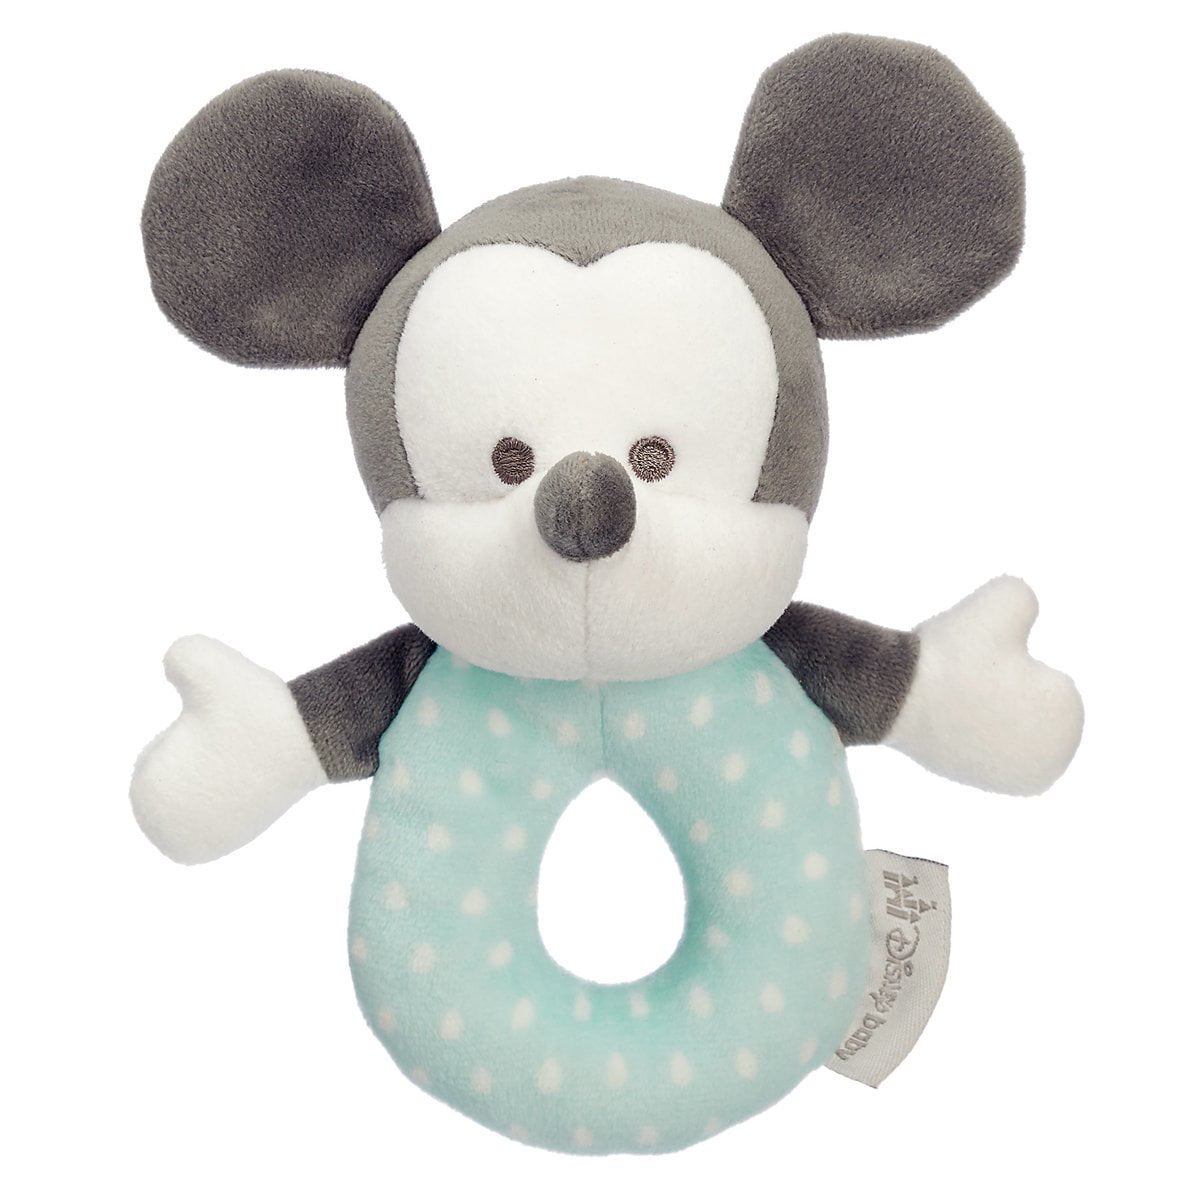 baby blue mickey mouse plush toy